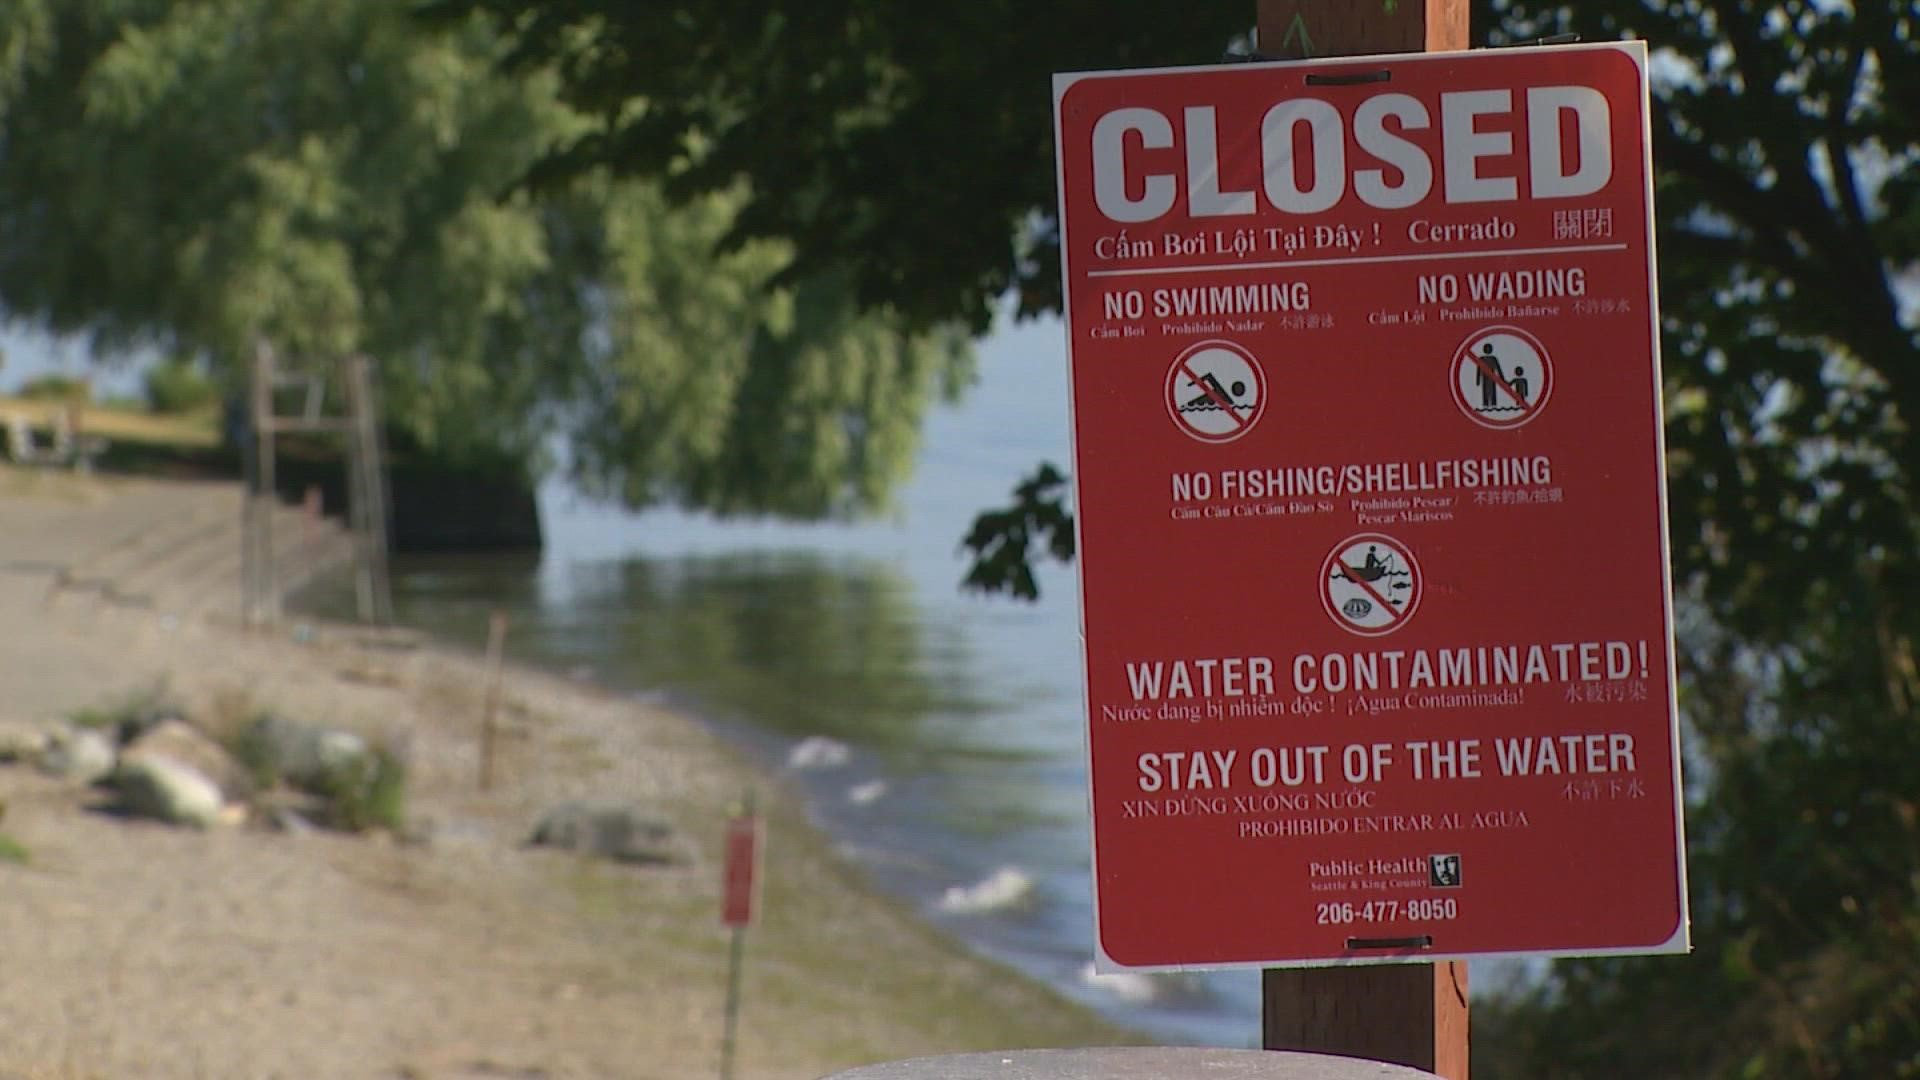 Water quality testing will be conducted until the King County Health Department deems it safe enough to reopen the beaches.